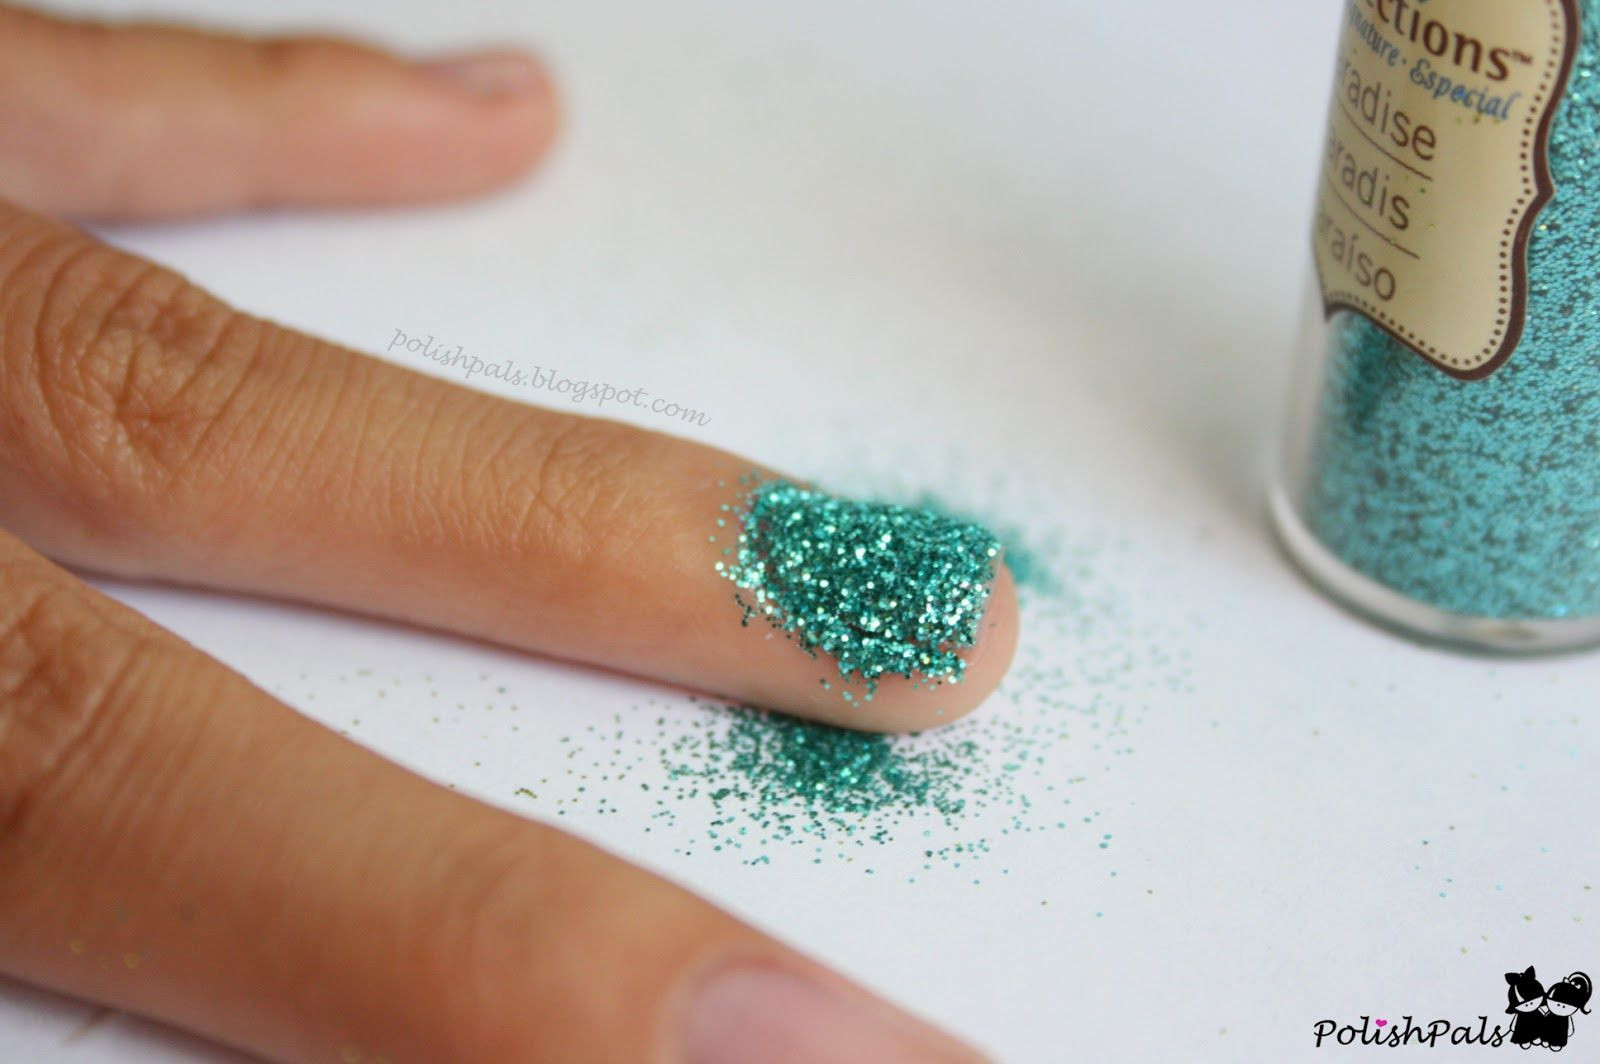 How To Apply Loose Glitter To Nails
 Learn how to apply the random loose glitter laying around